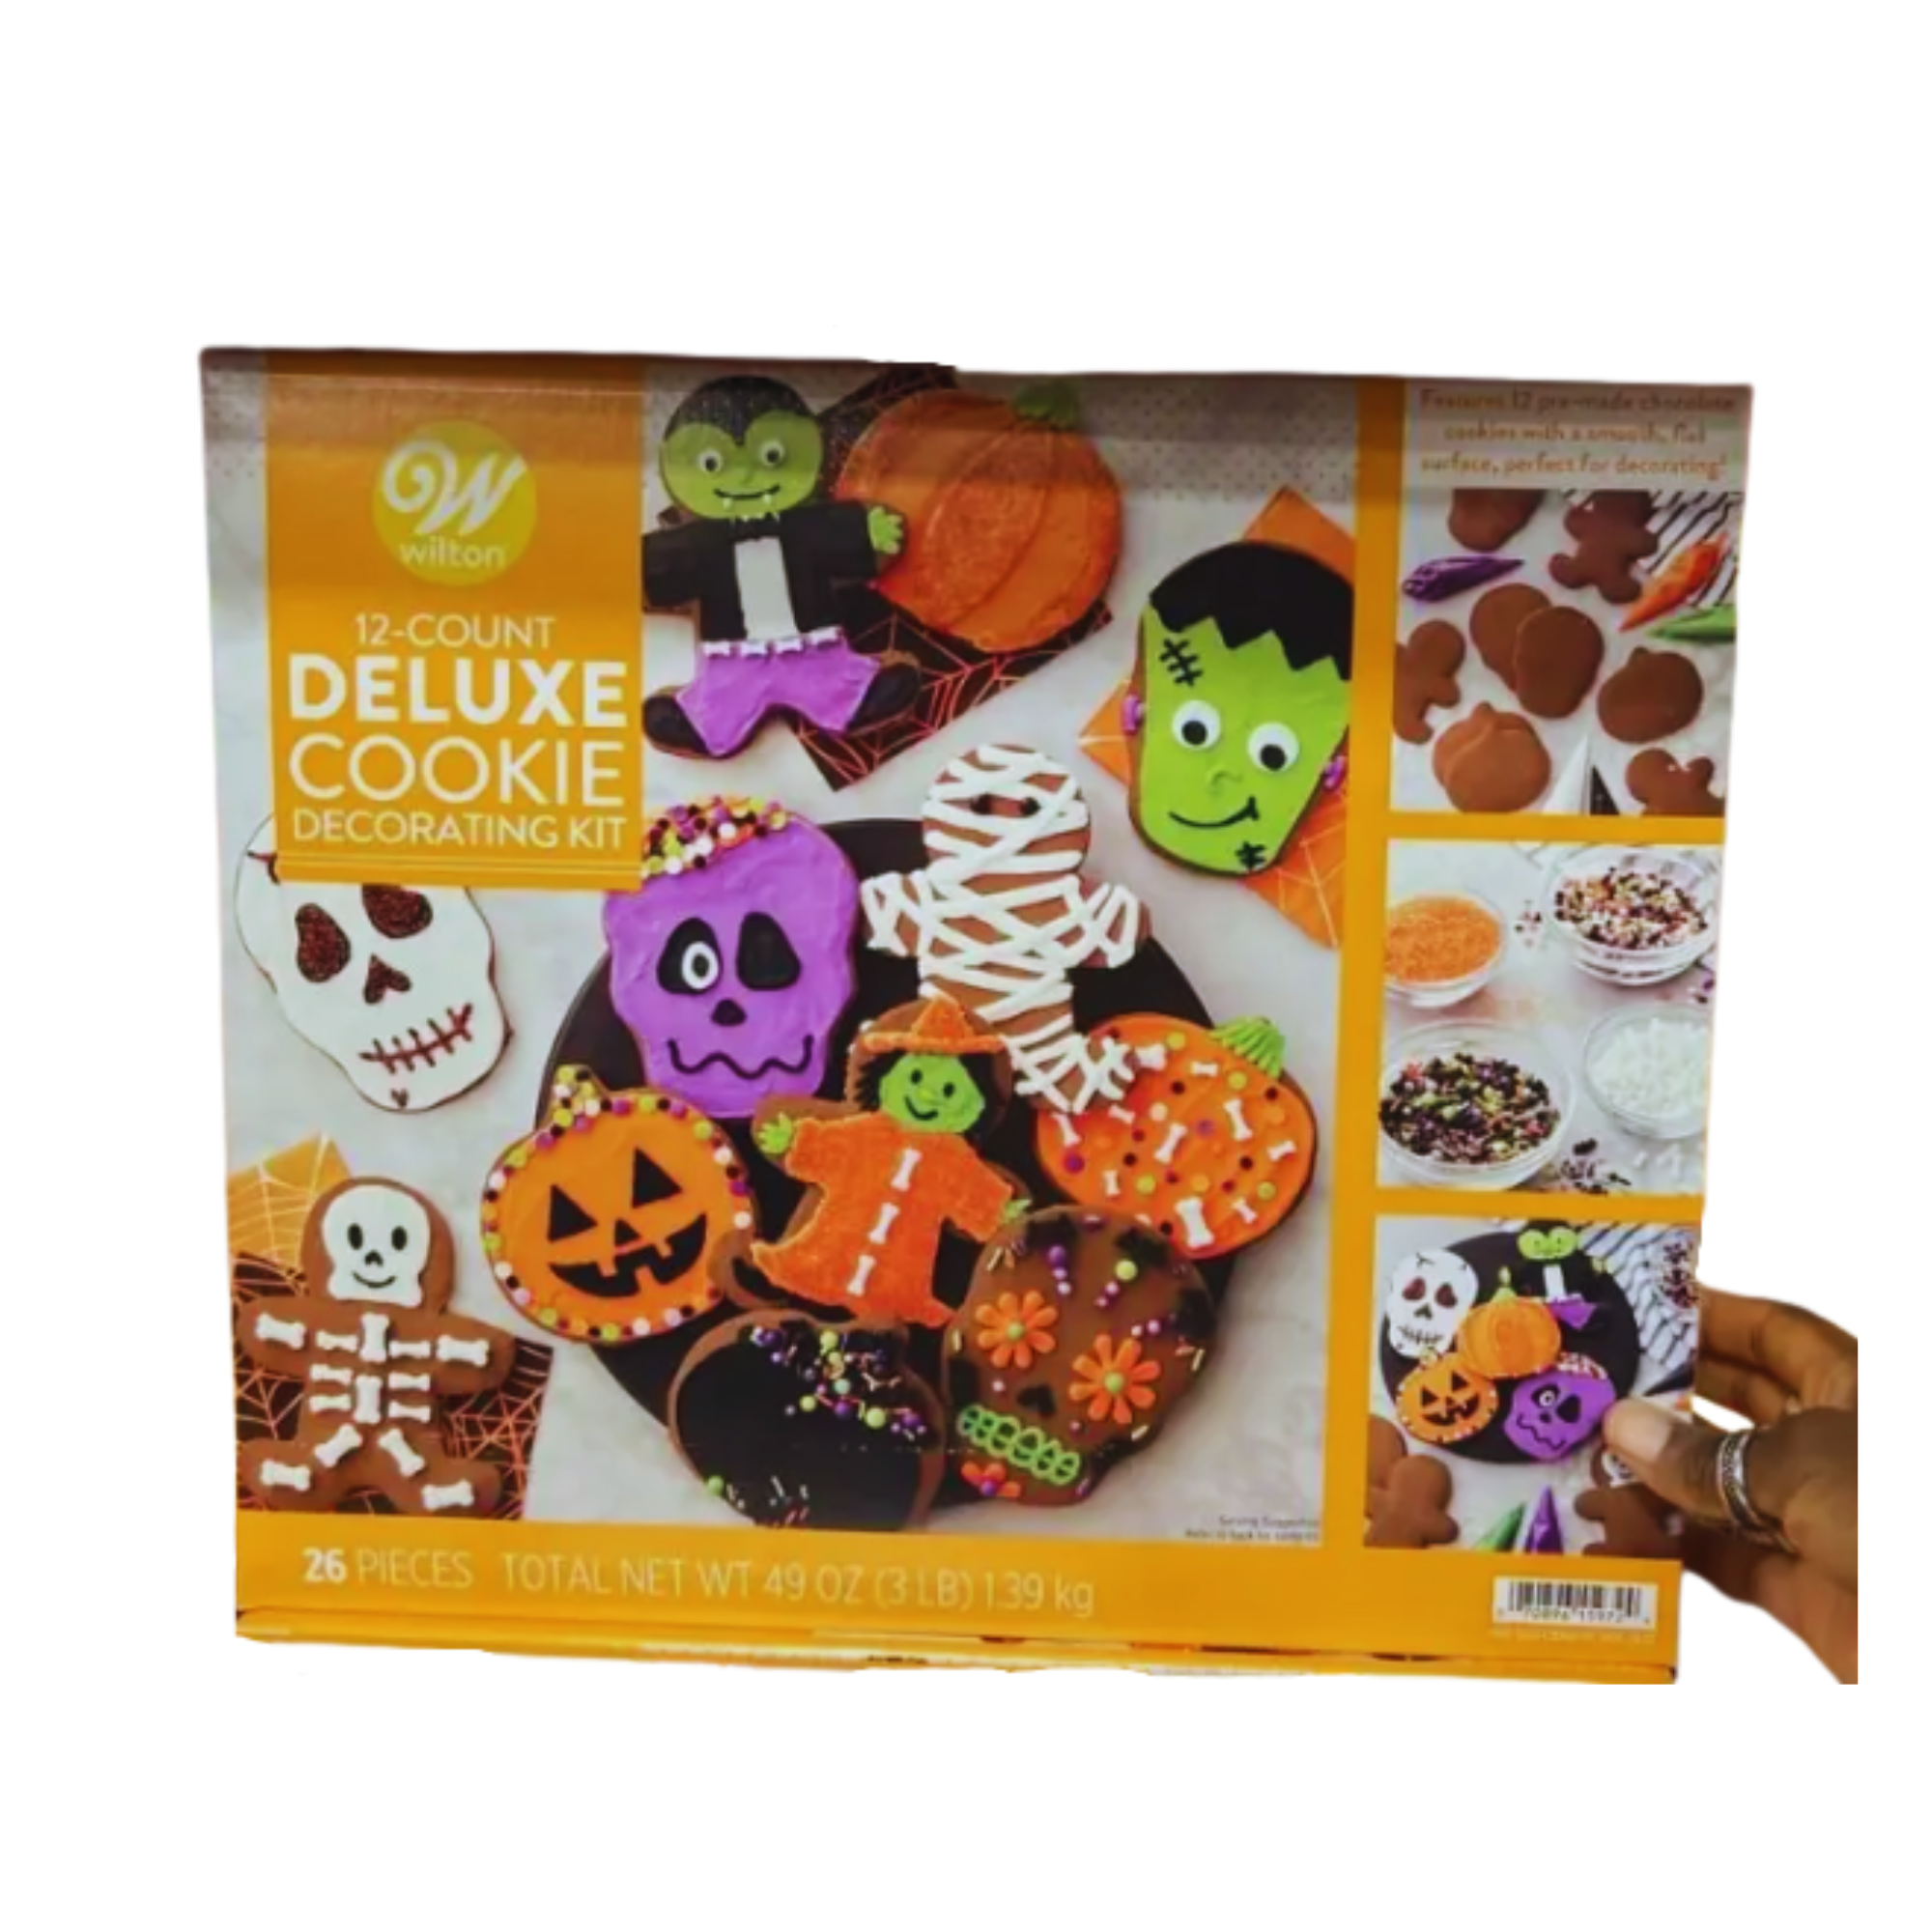 Raritan, NJ – Halloween Cookie Baking Supplies Available at Our Supply Store